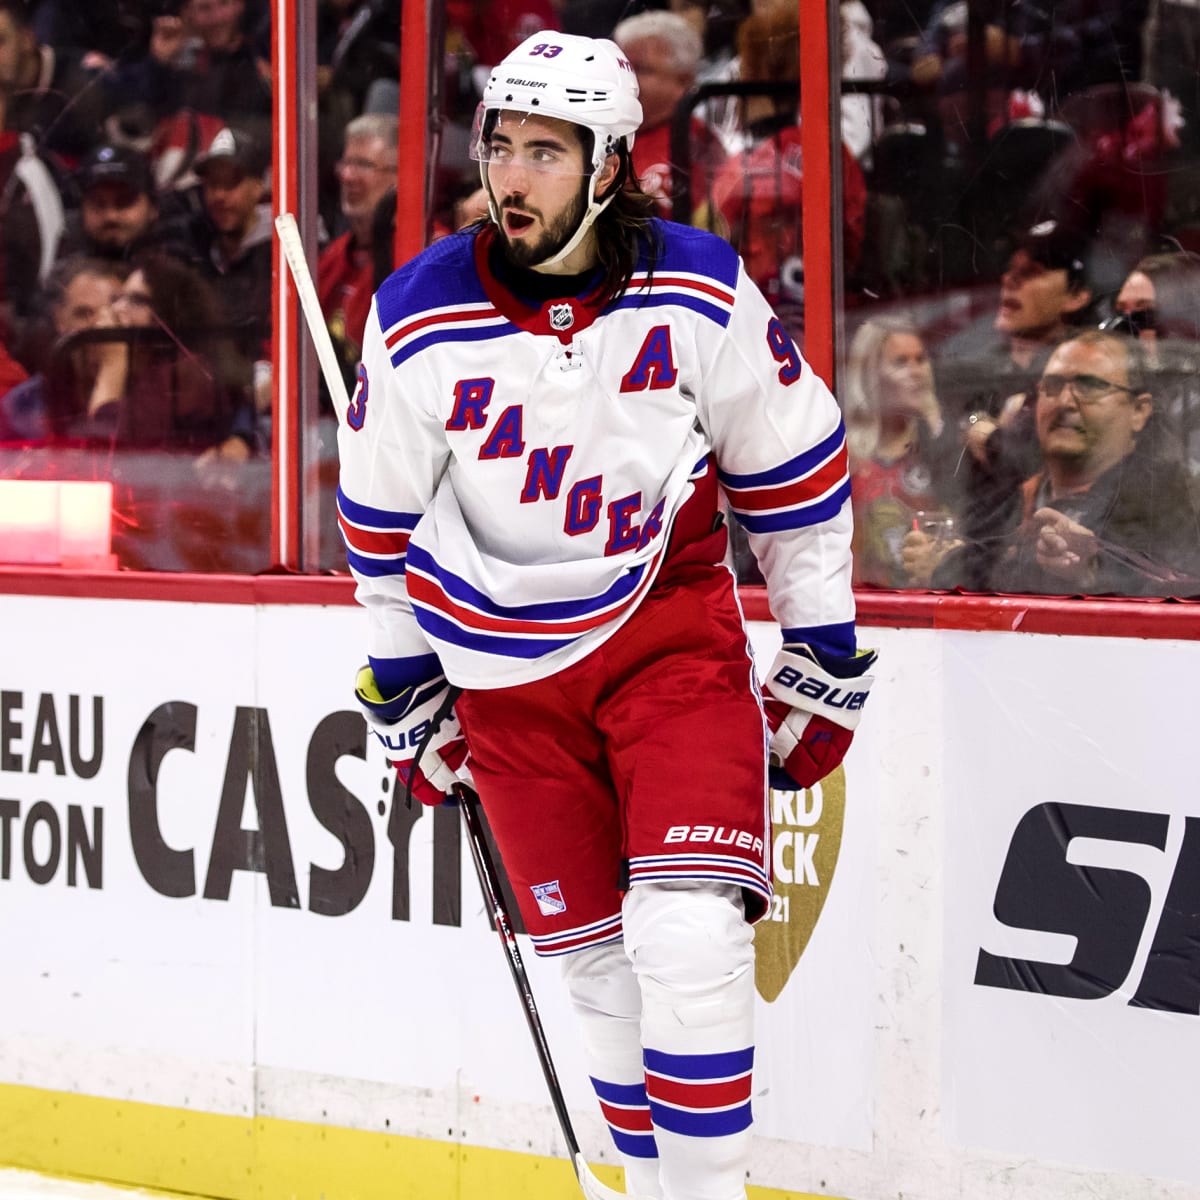 New York Rangers' Mika Zibanejad in action during an NHL hockey